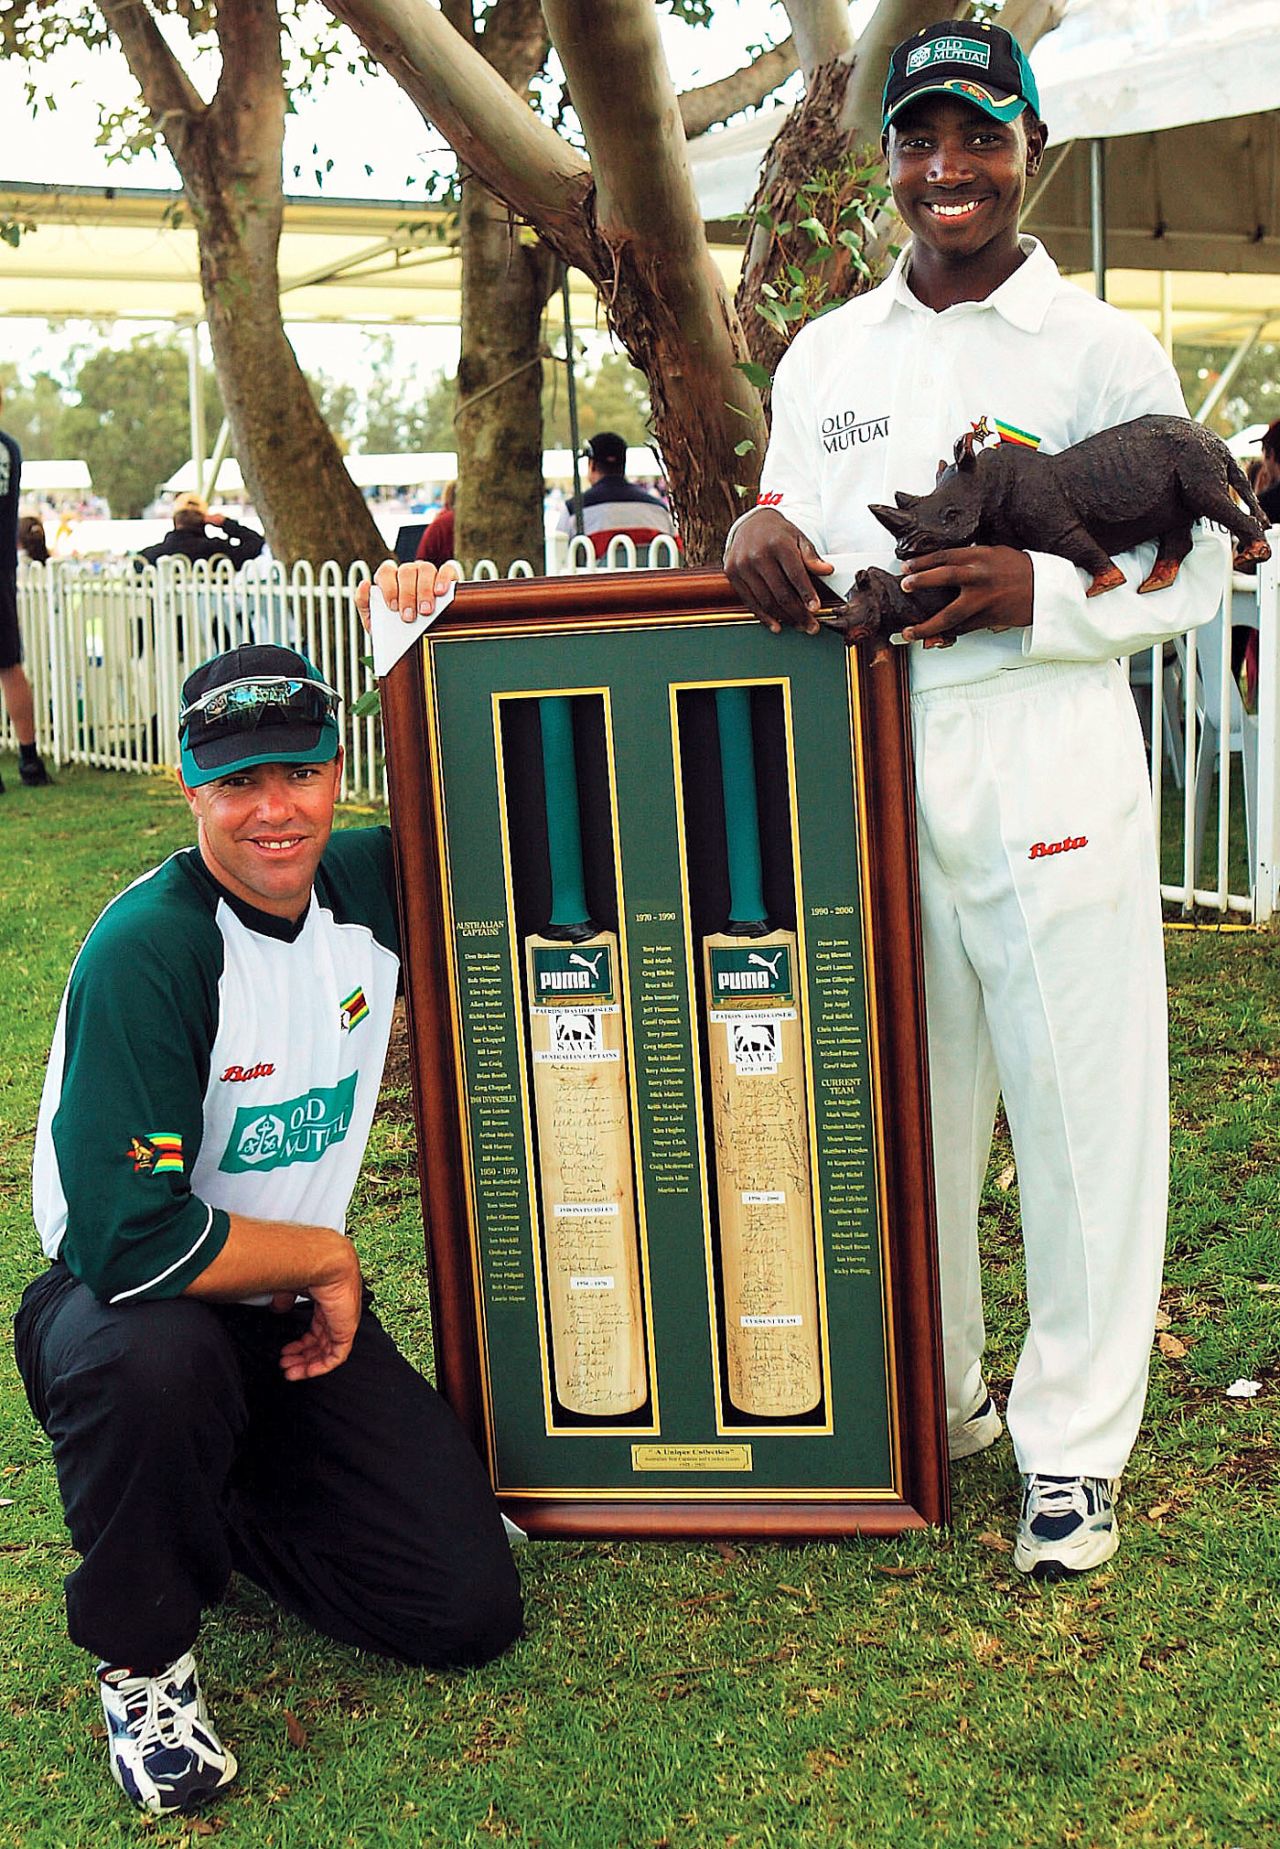 Heath Streak and Tatenda Taibu with bats signed by acurrent and former Australian cricketers to be auctioned to raise money to save the Black Rhino, Chairman's XI v Zimbabweans, Lilac Hill, Perth, October 1, 2003